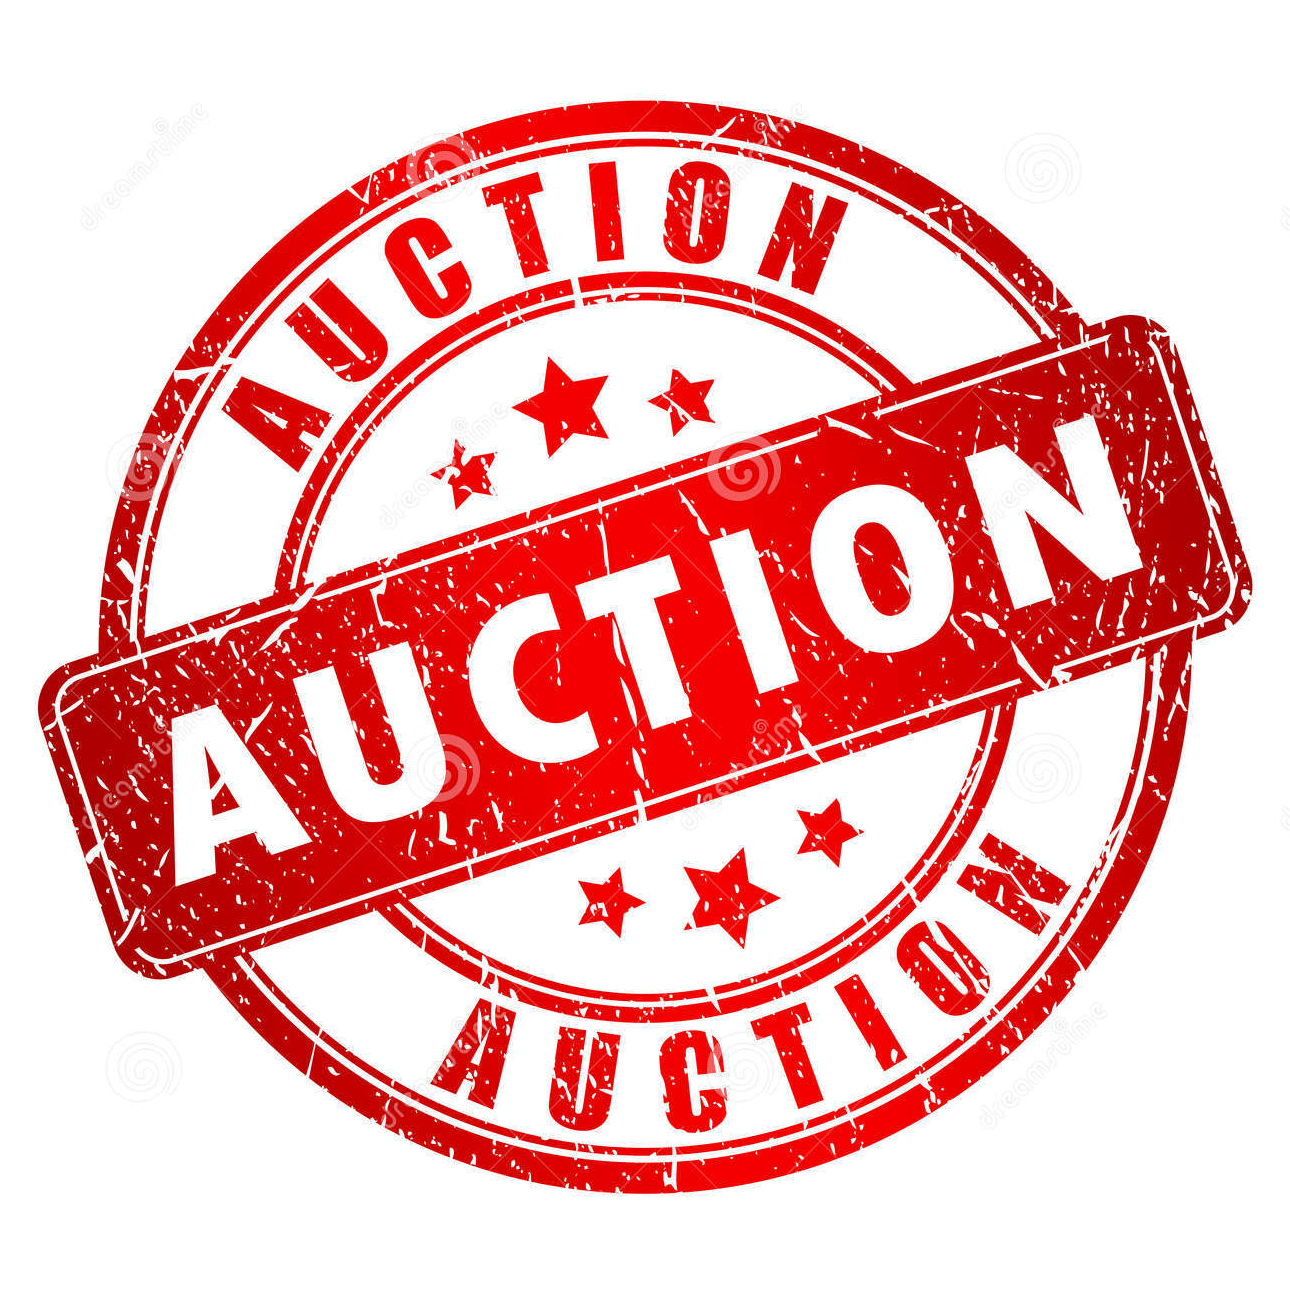 Filename: Auction-Graphic.png